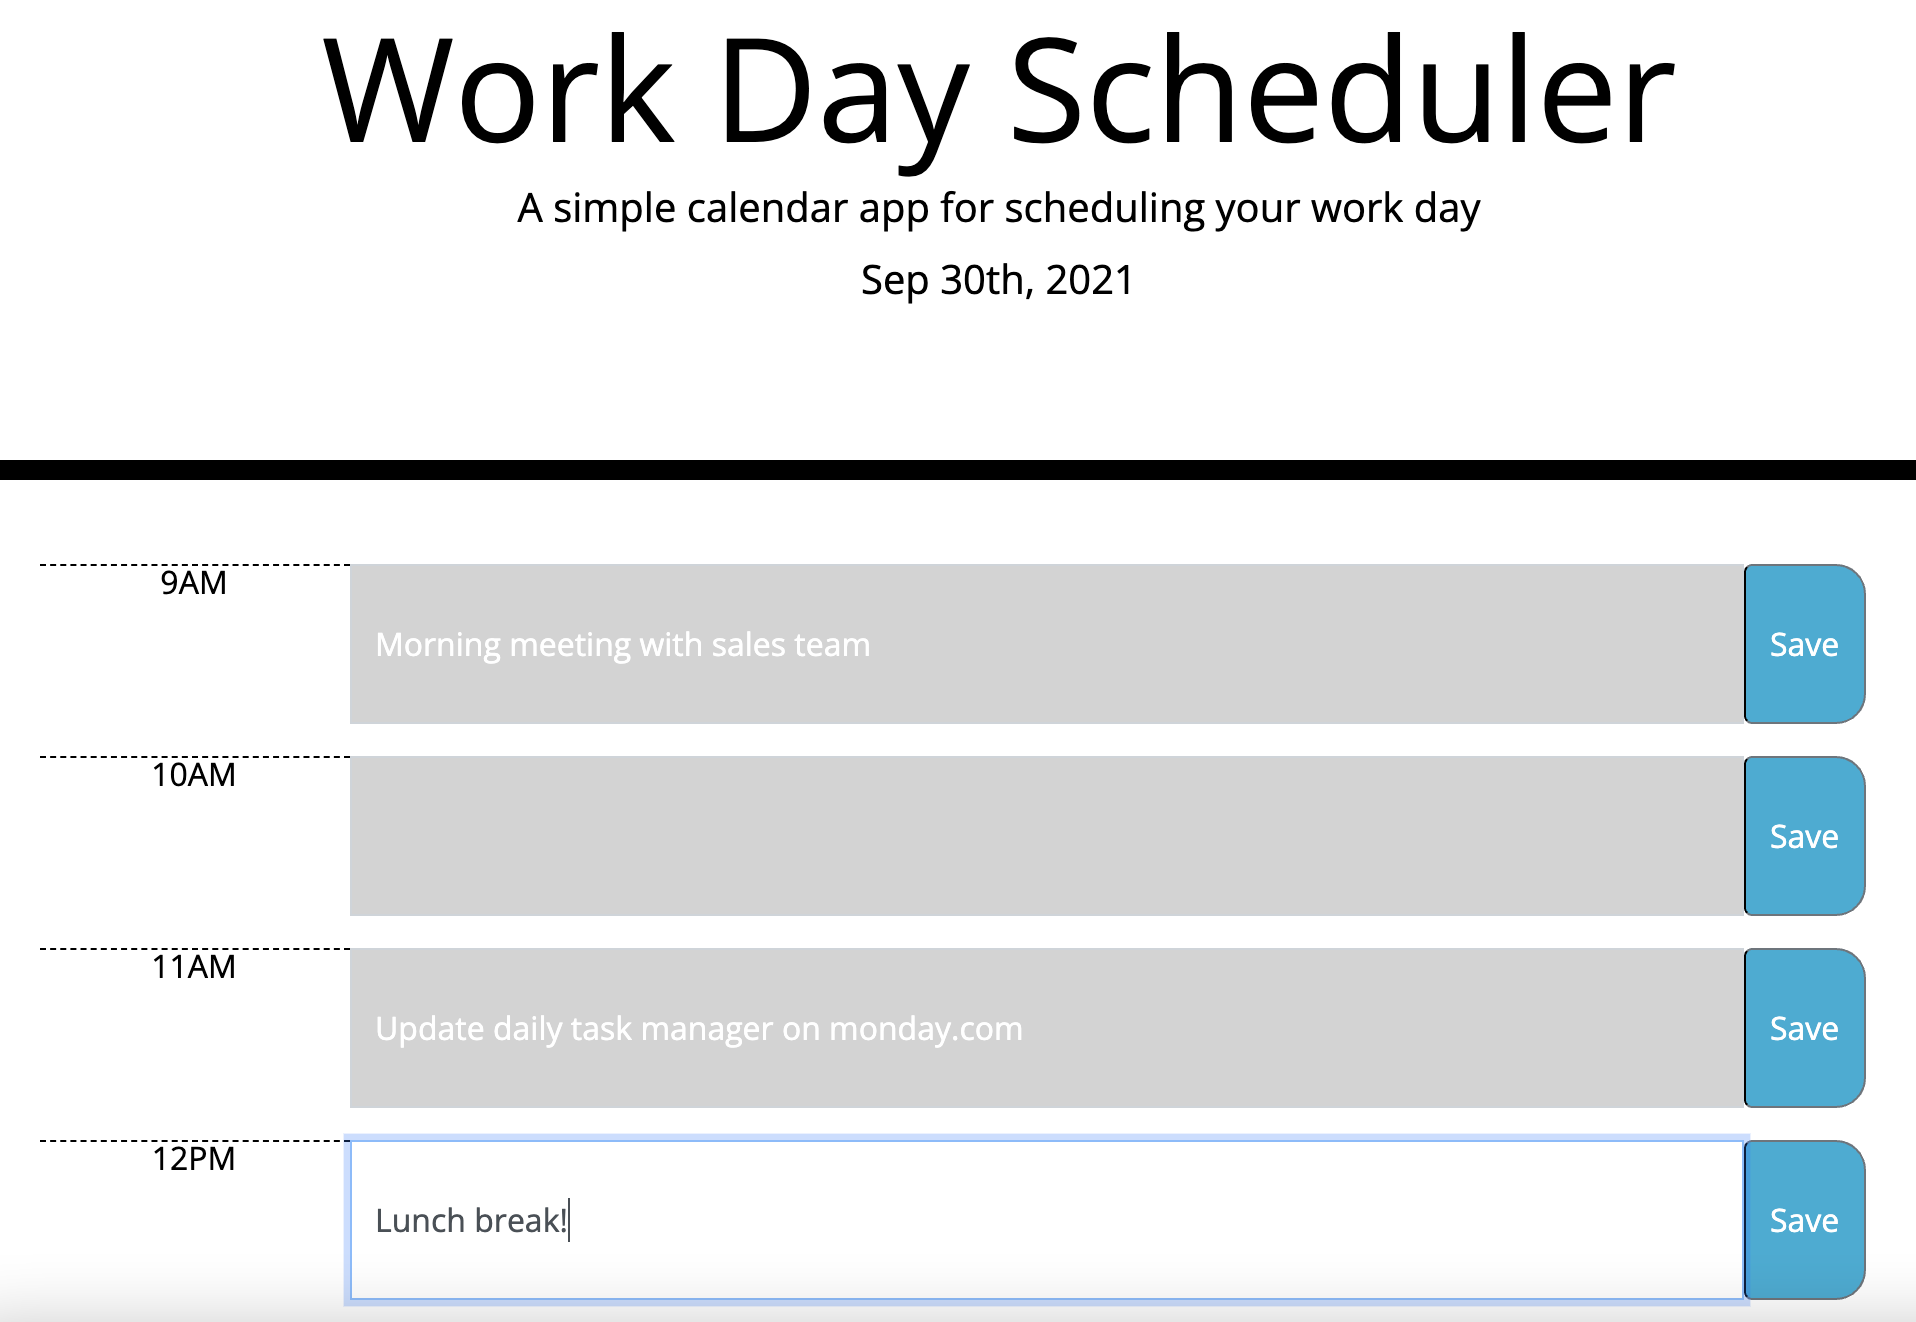 Website with gray bars and tasks inside with the captions "Morning meeting with sales team", "Update daily task manager on monday.com", and "Lunch break!